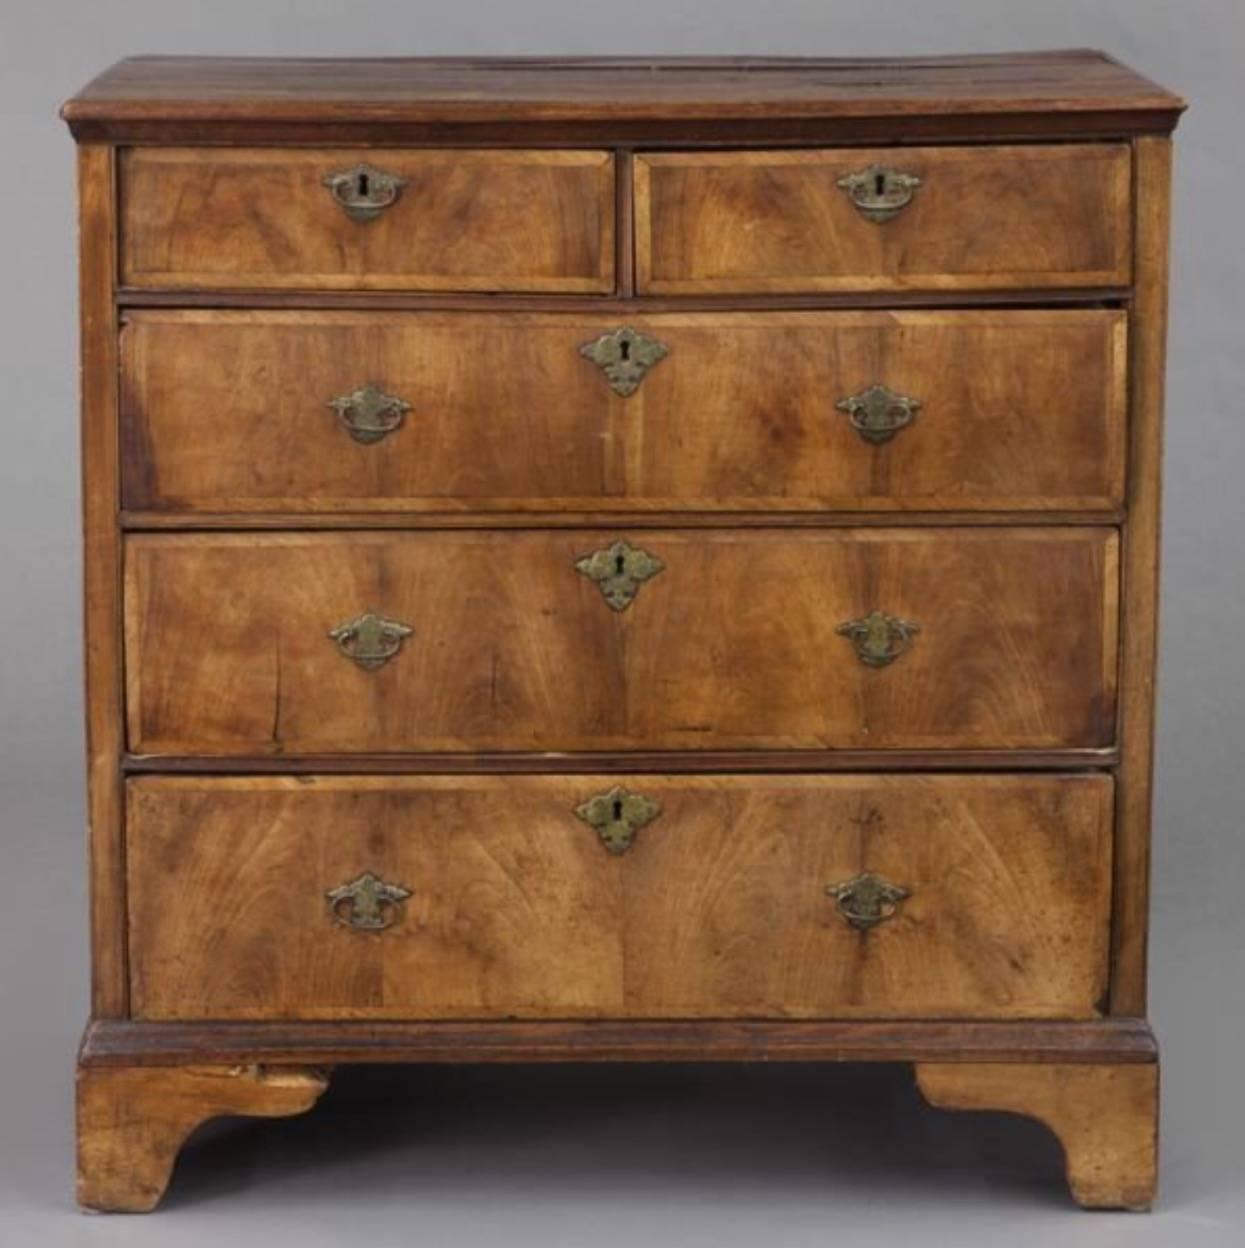 Early Georgian mixed wood five-drawer chest, with faded mahogany crossbanded drawer fronts with early (possibly original) engraved brass cotter pin backed pulls and standing on bracket feet. Commode.
Measures:
39